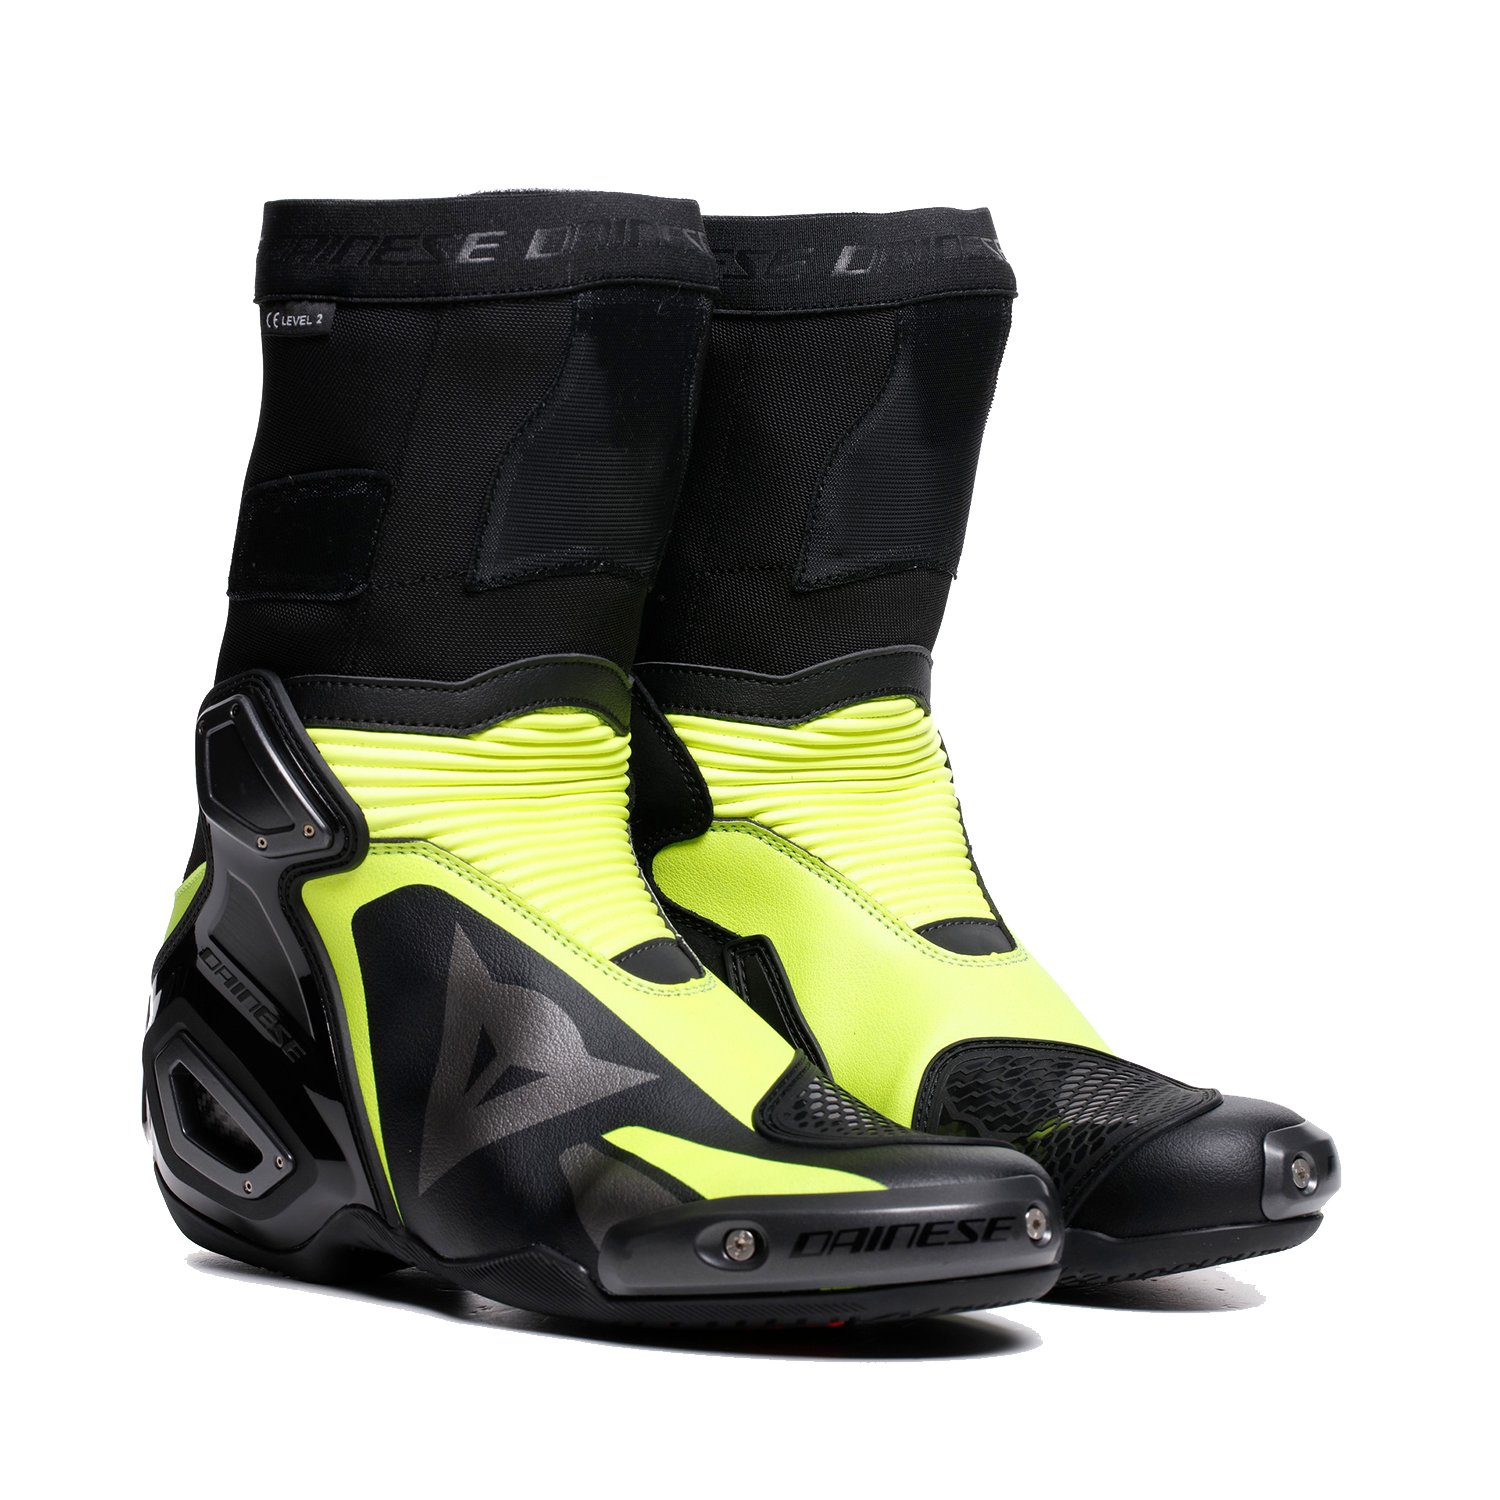 Image of Dainese Axial 2 Boots Black Yellow Fluo Size 41 EN